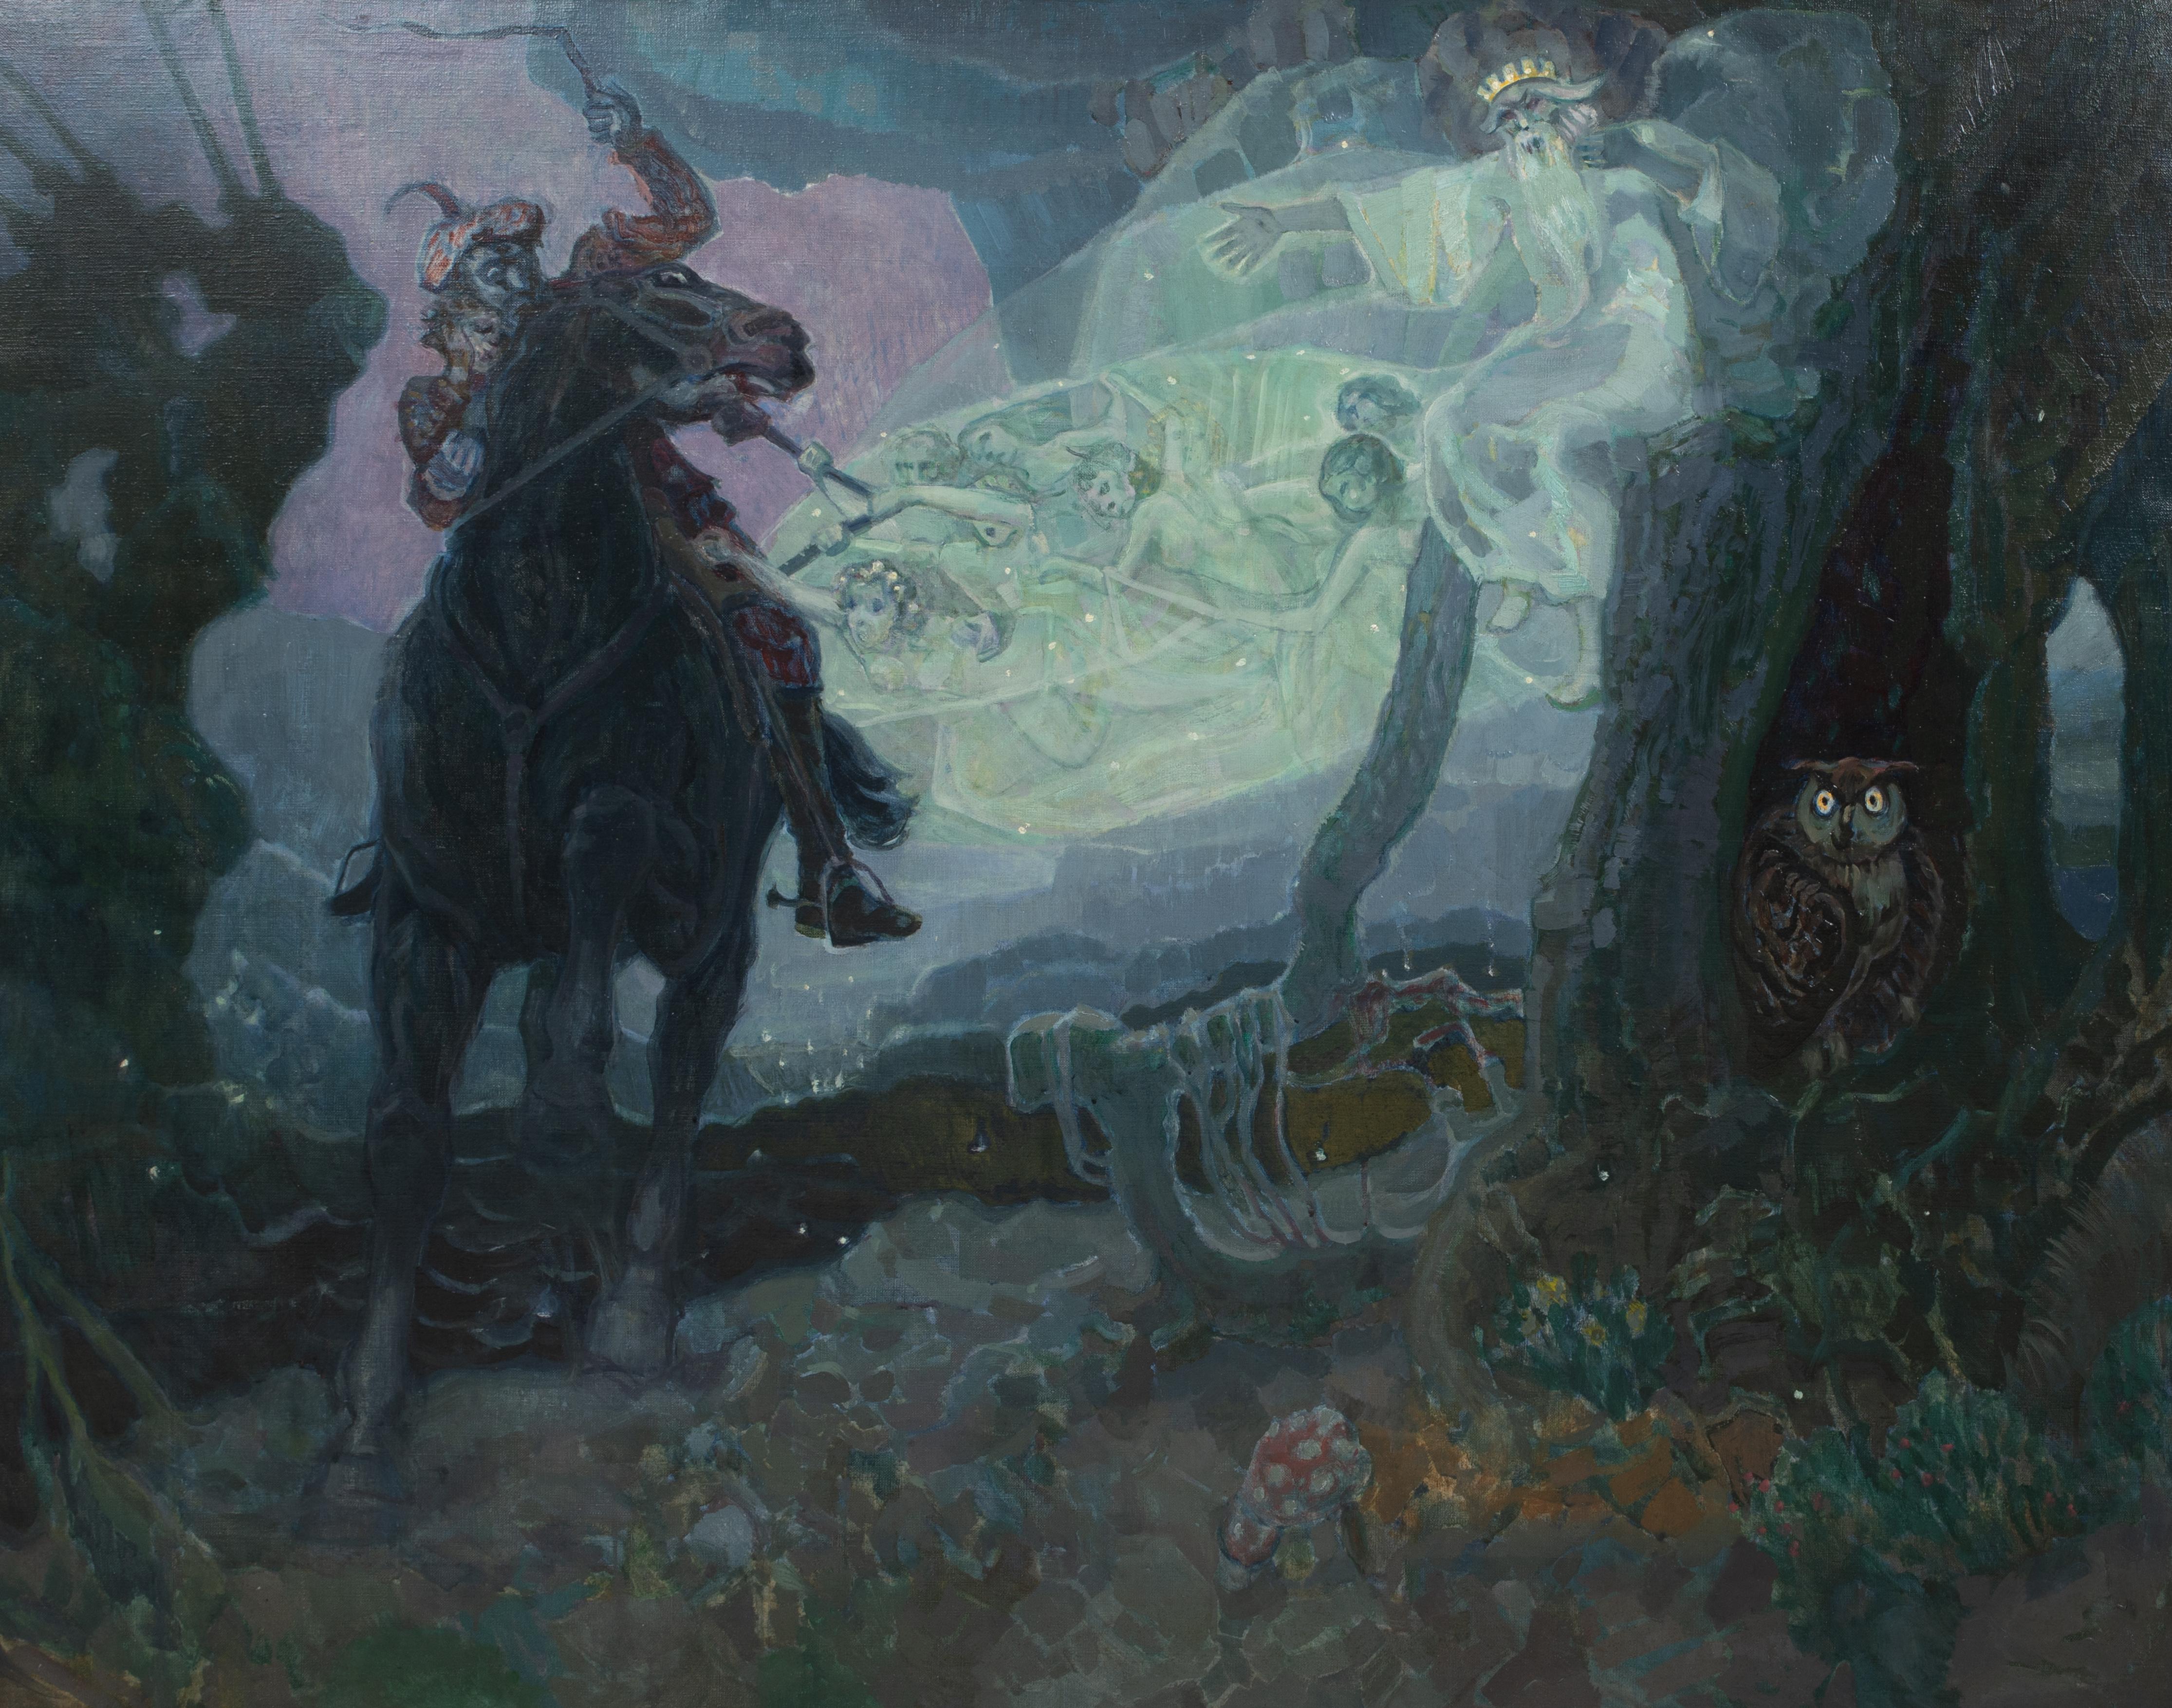 The Erlkönig by Johann Wolfgang Von Goethe, circa 1900

school of JAN TOOROP (1858-1928)

Huge circa 1900 Symbolist scene from Goethe's poem The Erlkönig, oil on canvas. Excellent quality and condition scene as the King of The Fairies attempting to